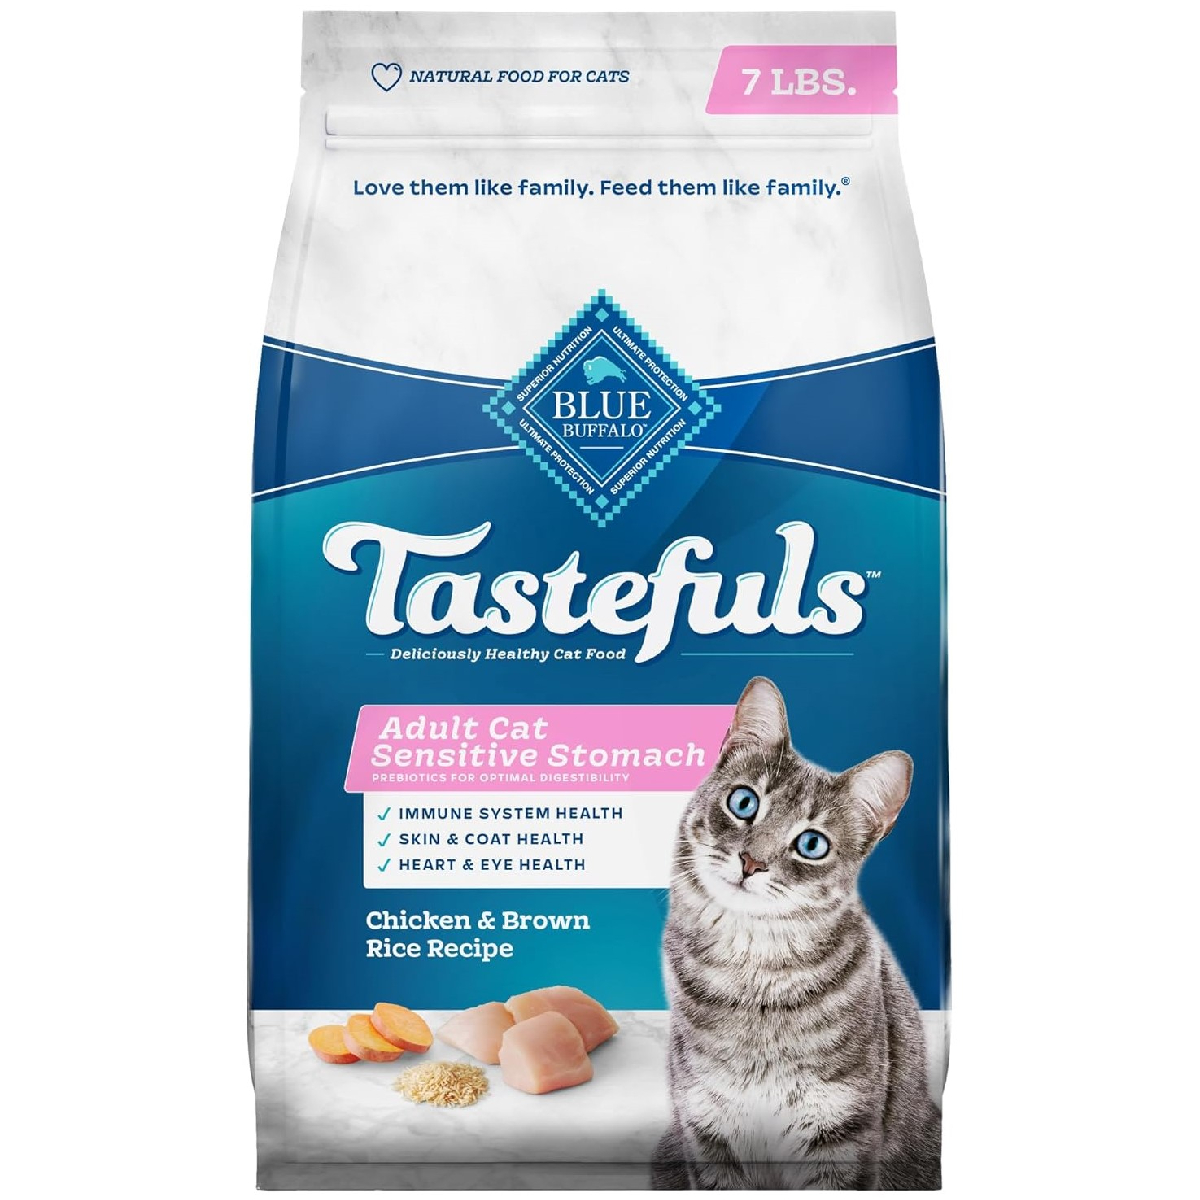 Blue Buffalo Tastefuls Adult Dry Cat Food Sensitive Stomach Formula, Made in the USA with Natural Ingredients, Chicken Recipe